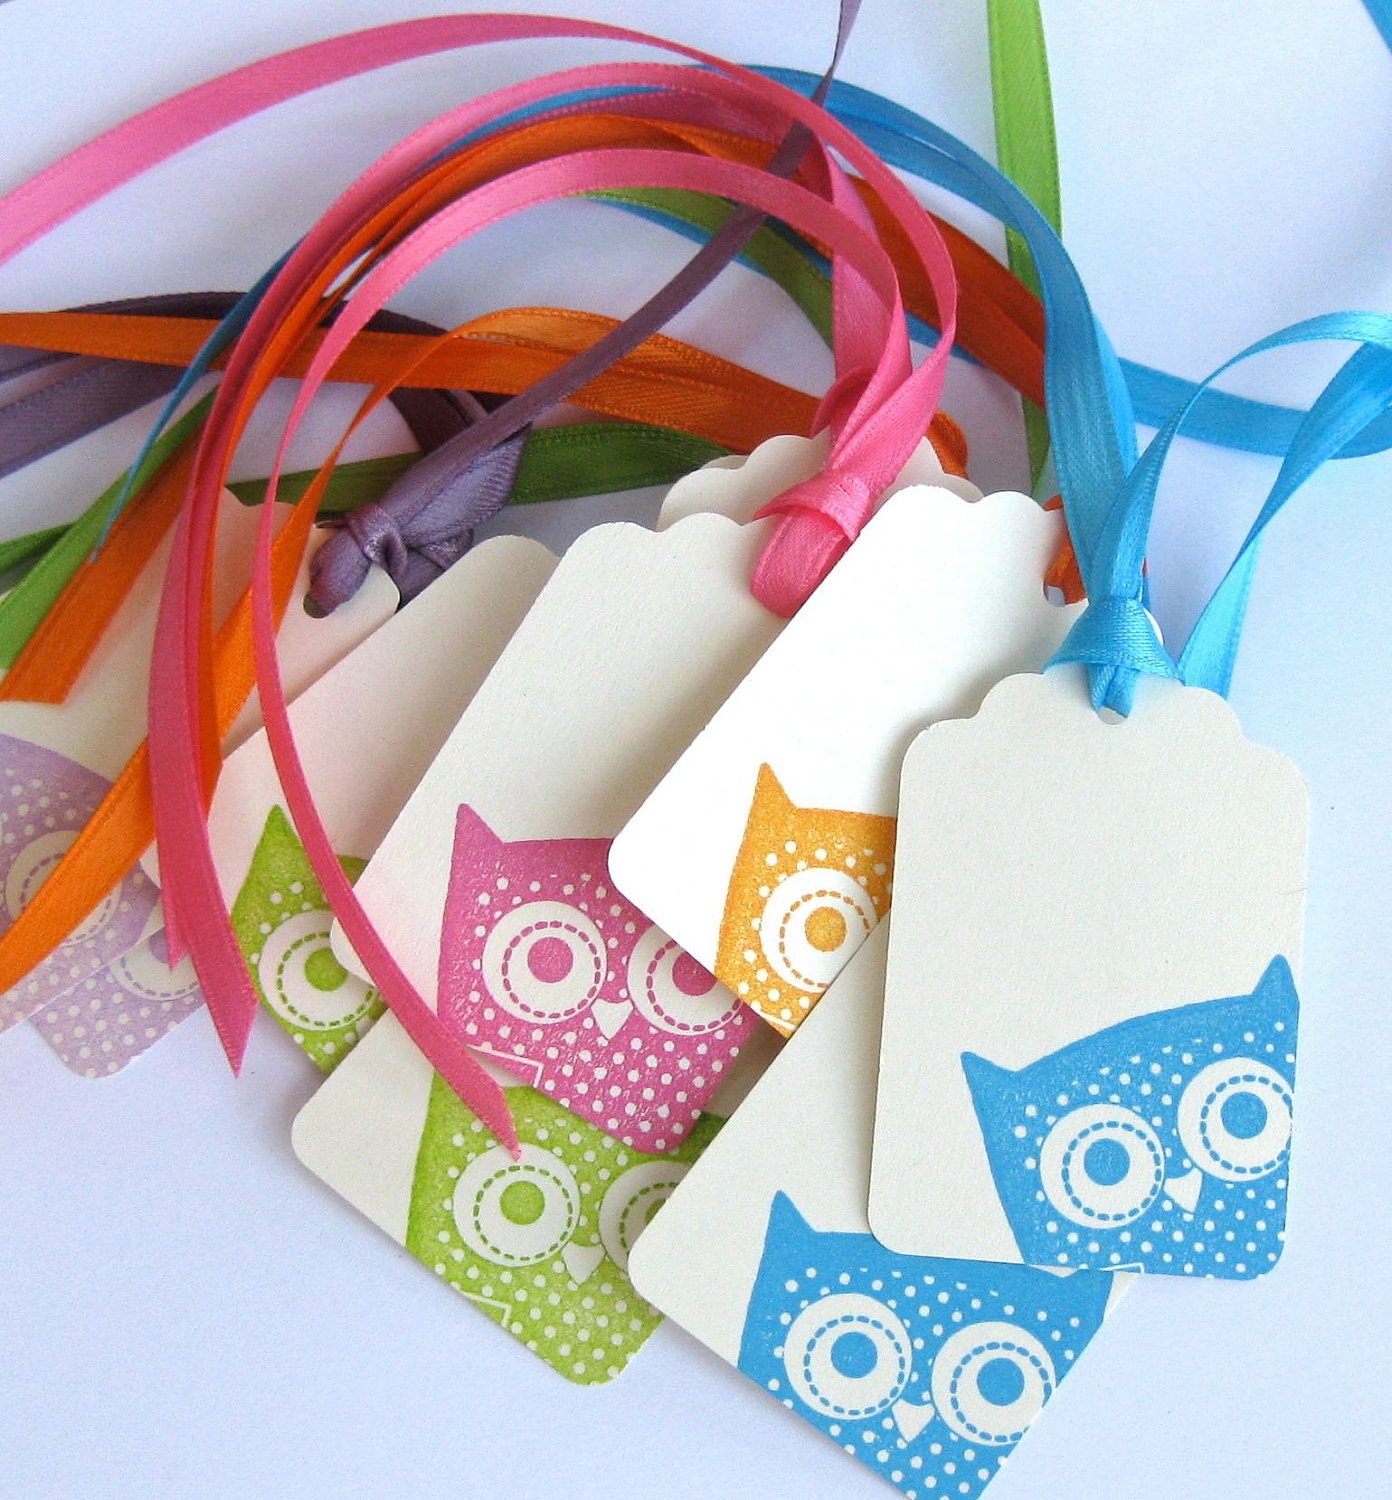 Peek - A - Whoo - Hand Stamped Peeking Owl Gift Tags - Set of 10 - Variety Pack - Multi Colors and Cream